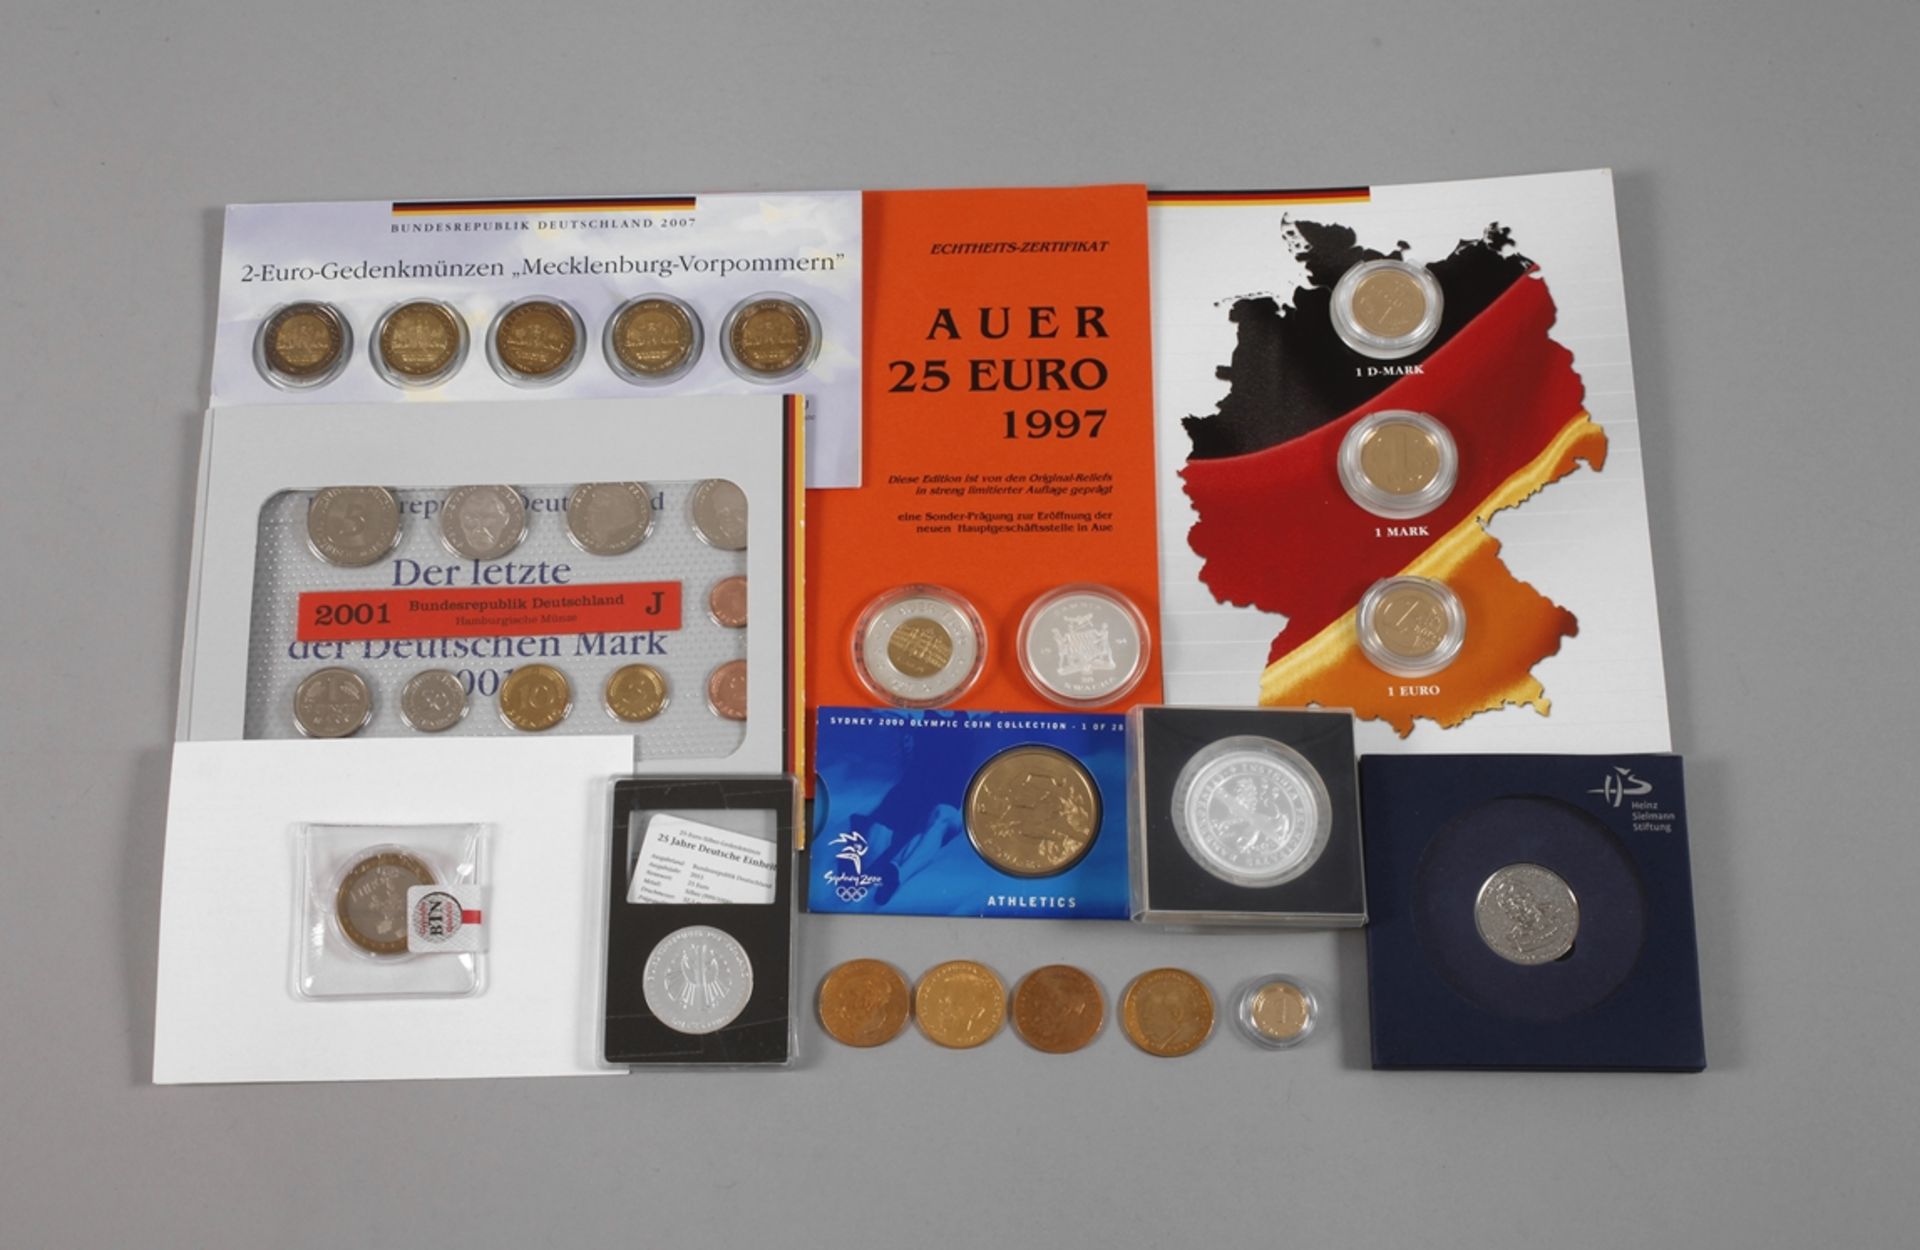 Items of commemorative coins and medals